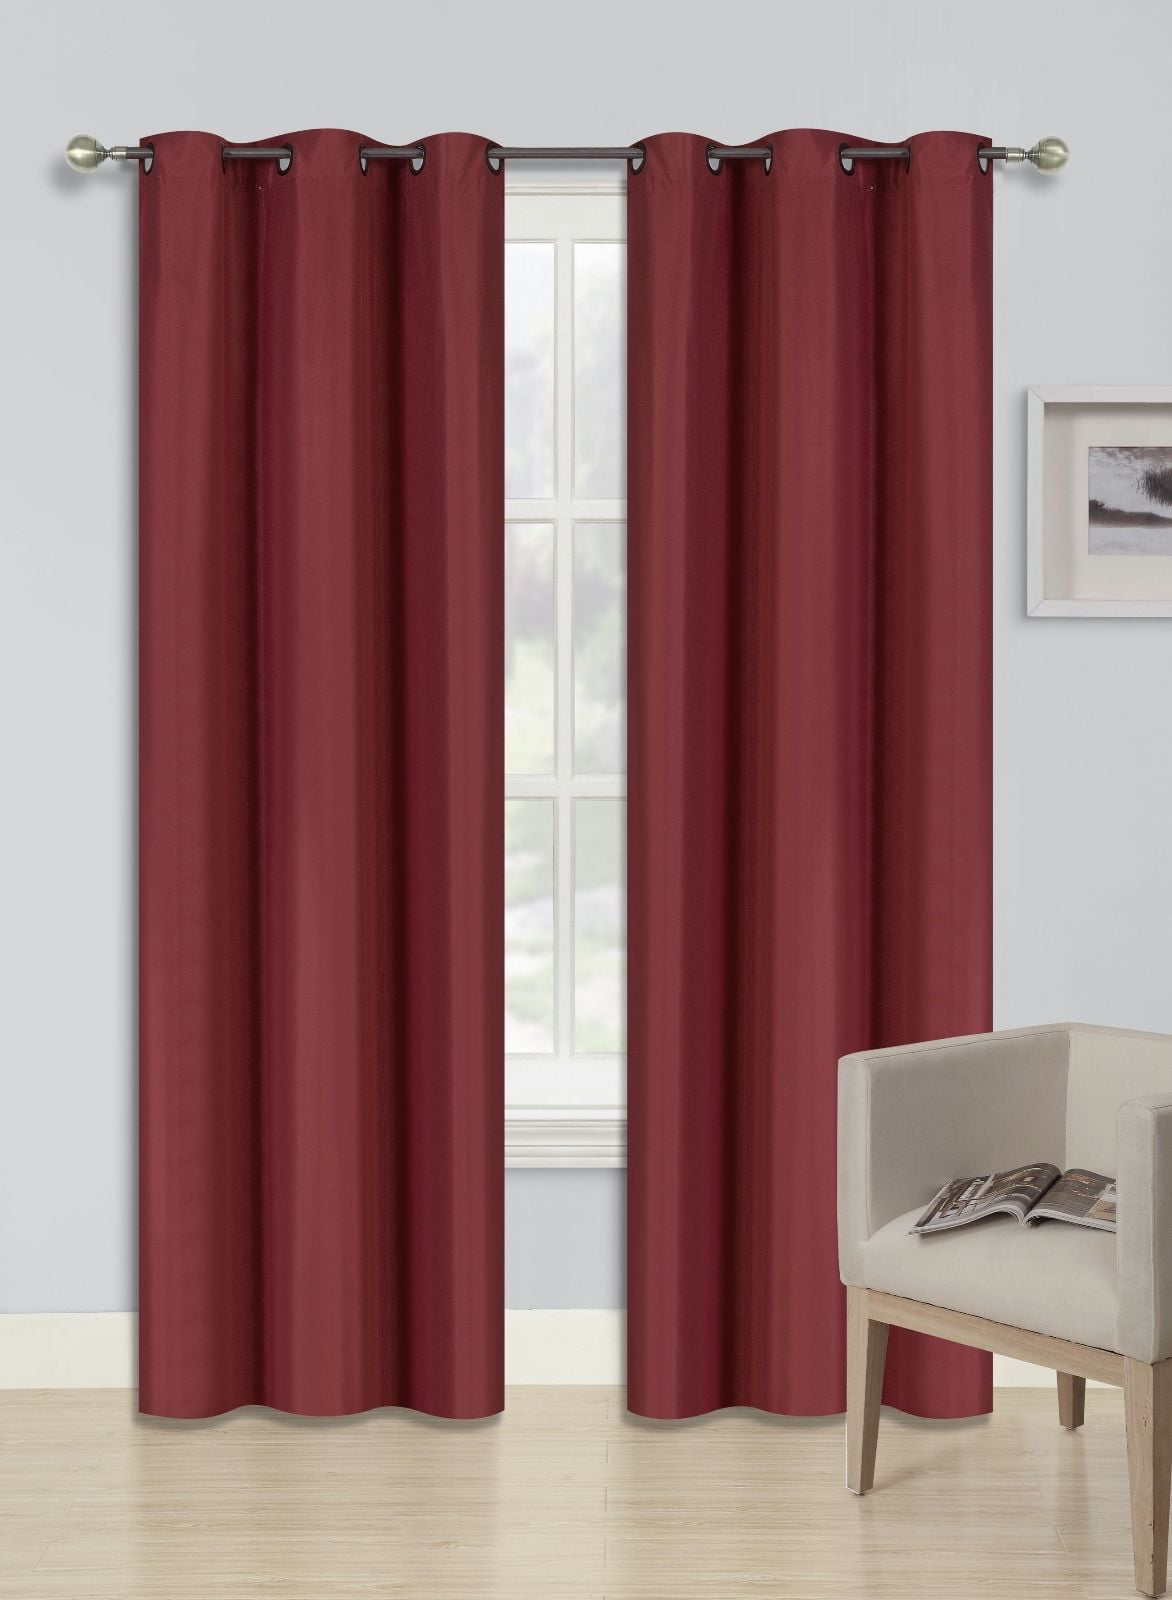 INSULATED FOAM LINED THERMAL BLACKOUT GROMMET WINDOW CURTAIN PANEL 1PC BURGUNDY 